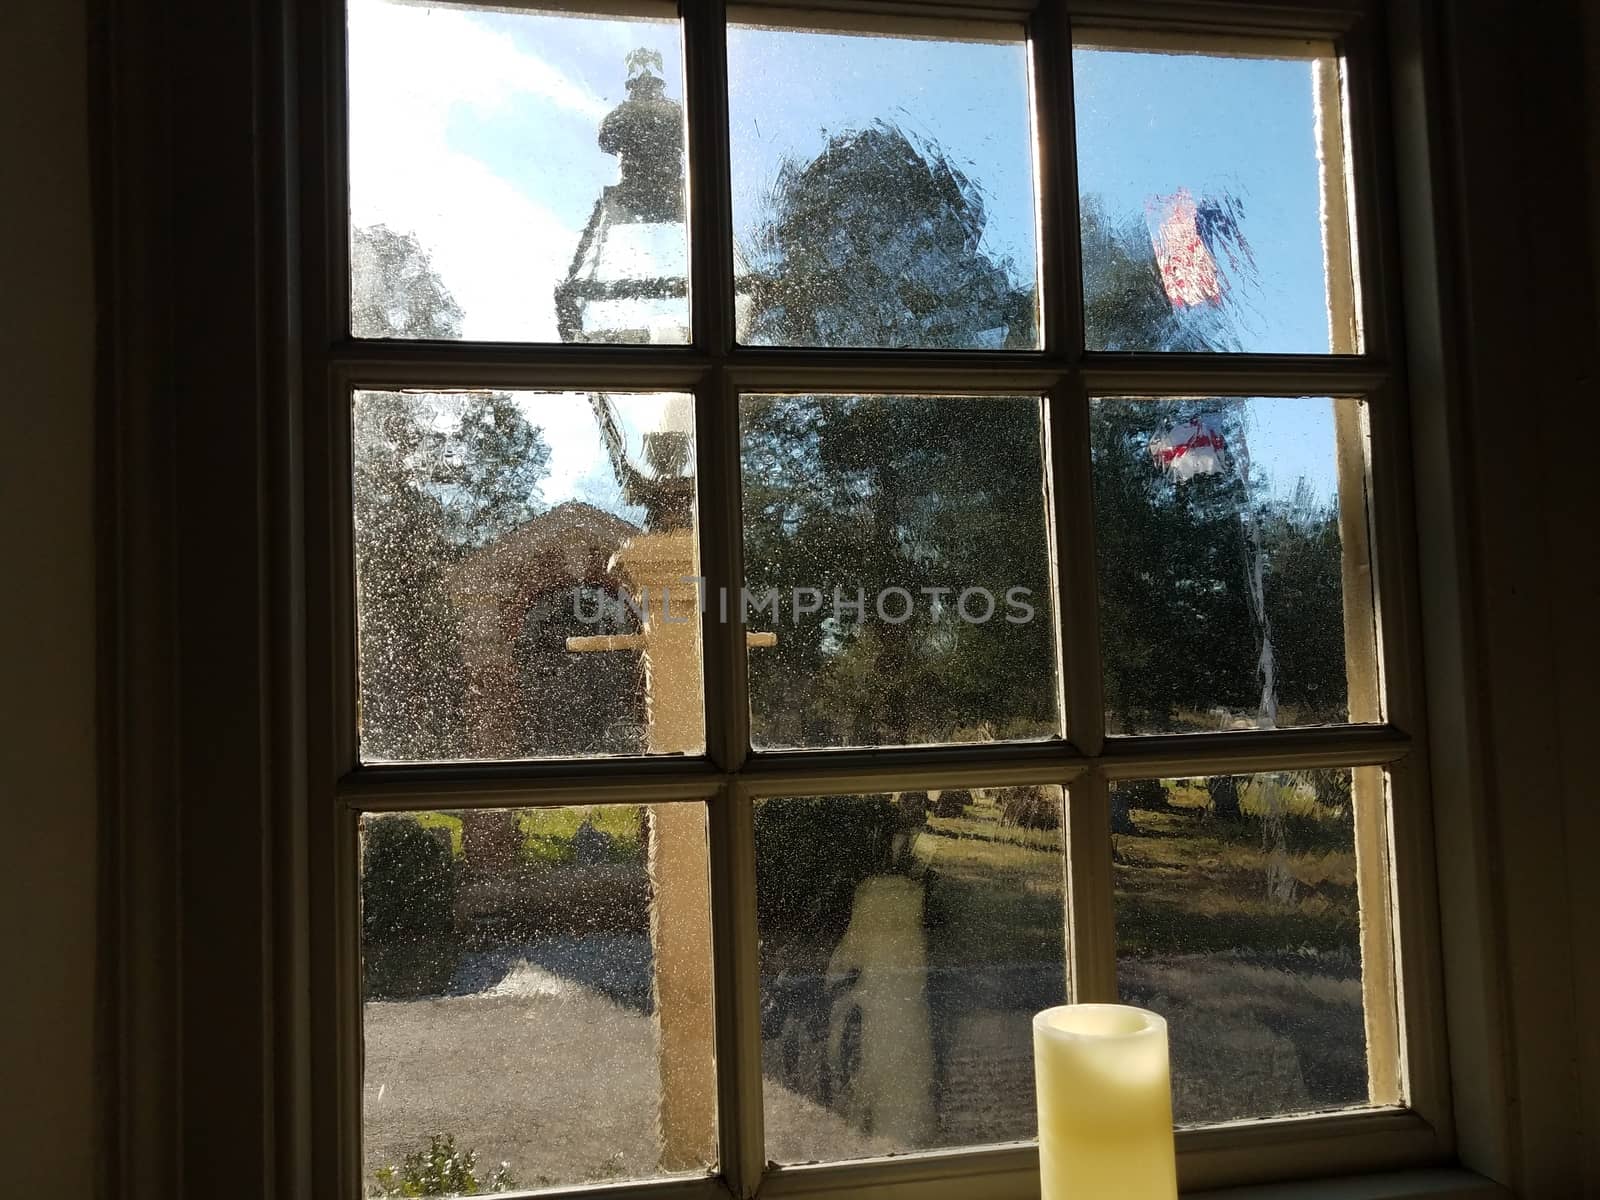 candle, thick glass window, and flag outdoor by stockphotofan1